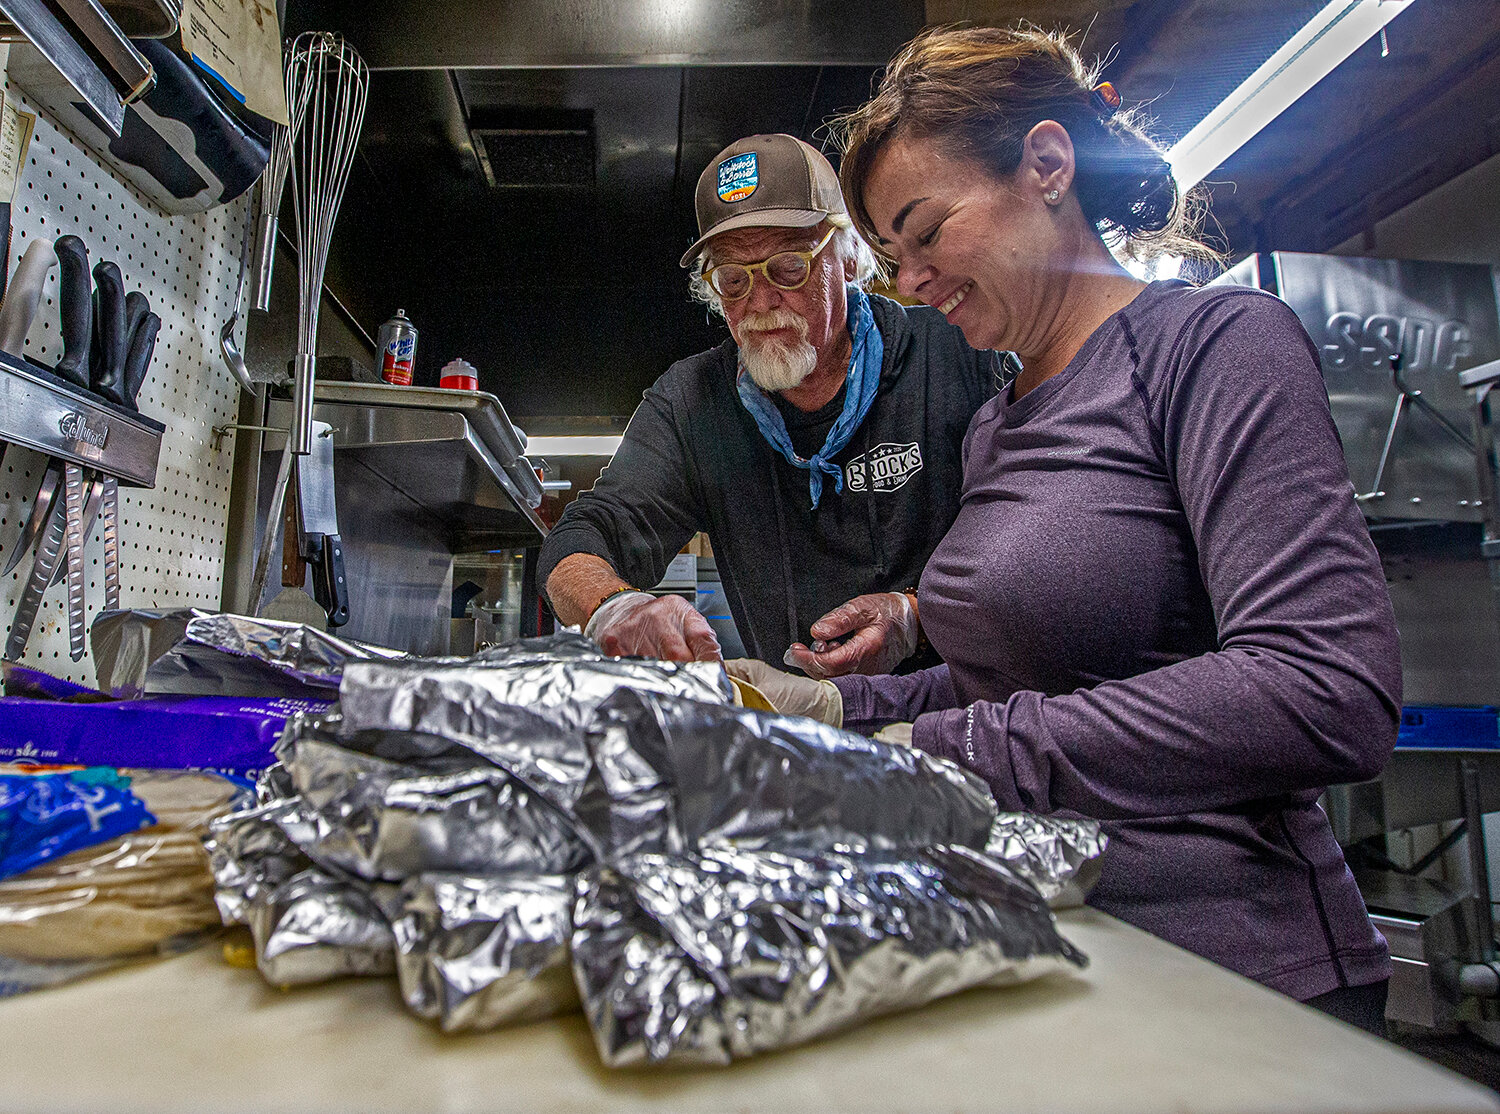 James Brock, owner of Brock’s Food &amp; Drink in Acton, is giving away 200 breakfast tacos every day through the summer for anyone — “No questions asked,” Brock said. Local real estate agent Kami Kemp helps Brock prepare the food before taking it out to the drive-through station in front of the tavern Monday, May 24, 2021.